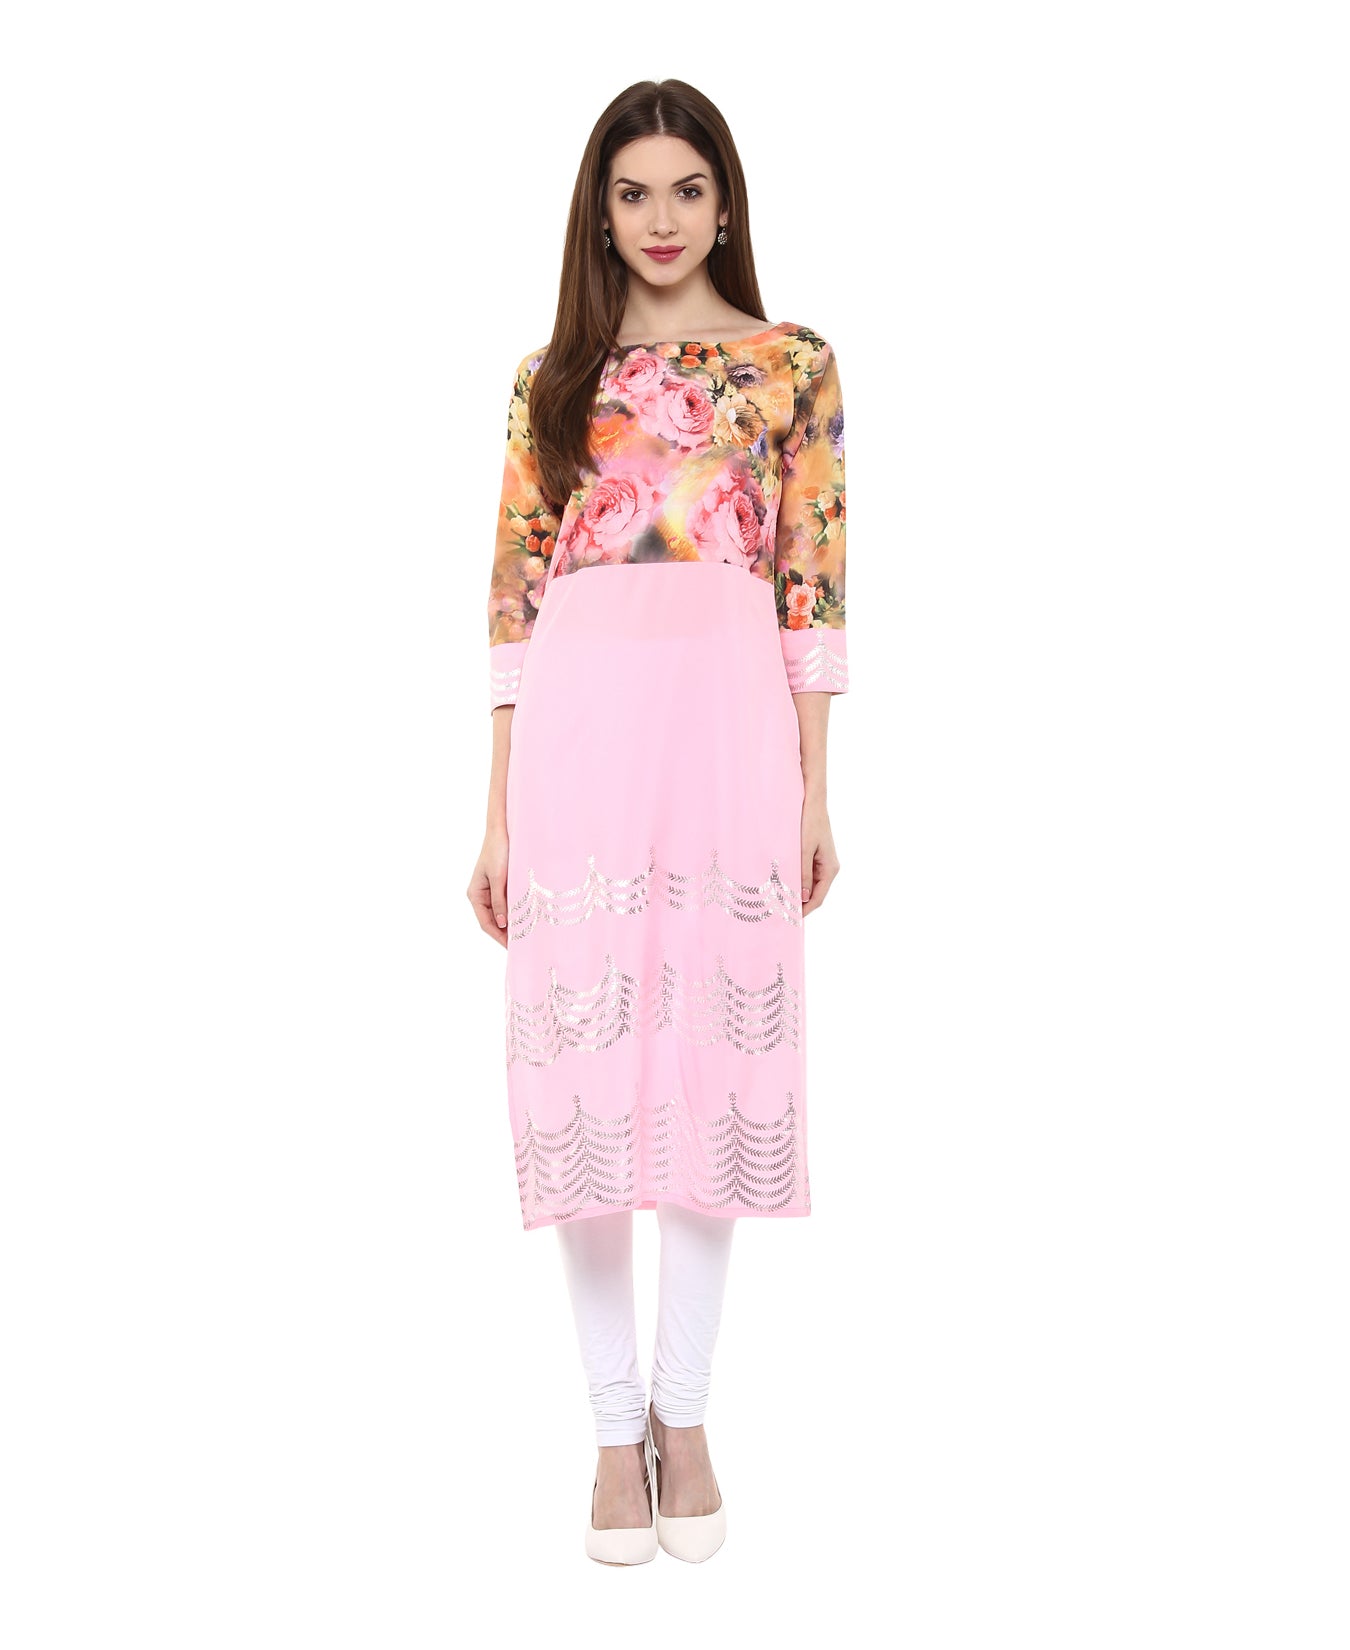 Women's Pink Floral And Metallic Printed Partywear Only Kurti - Ahalyaa